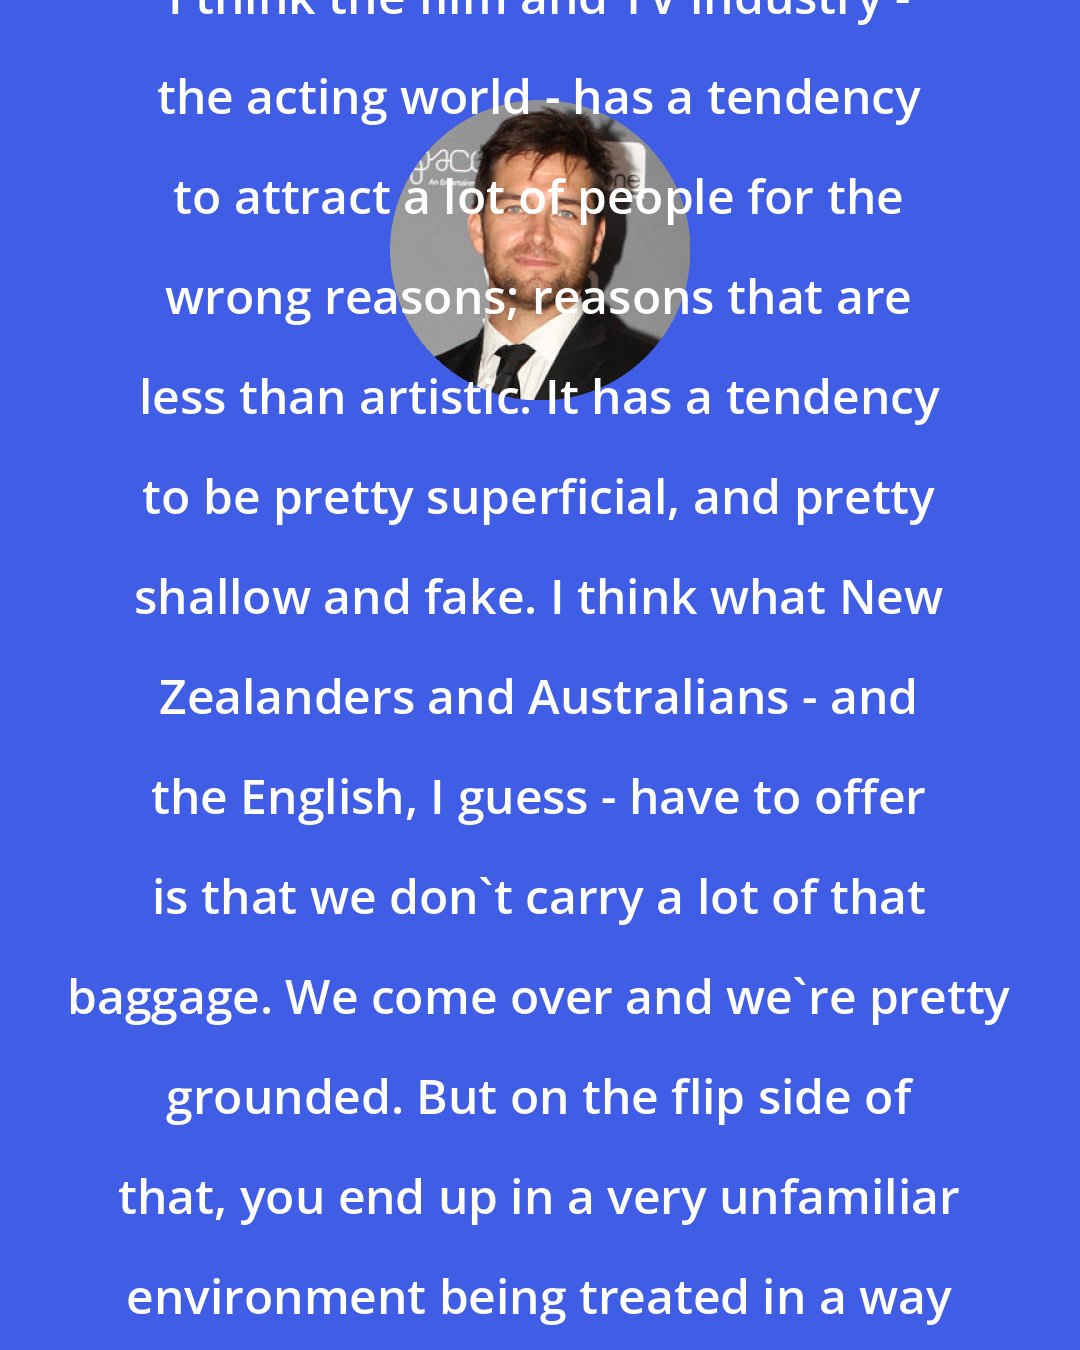 Antony Starr: I think the film and TV industry - the acting world - has a tendency to attract a lot of people for the wrong reasons; reasons that are less than artistic. It has a tendency to be pretty superficial, and pretty shallow and fake. I think what New Zealanders and Australians - and the English, I guess - have to offer is that we don't carry a lot of that baggage. We come over and we're pretty grounded. But on the flip side of that, you end up in a very unfamiliar environment being treated in a way that's a little bit surreal.